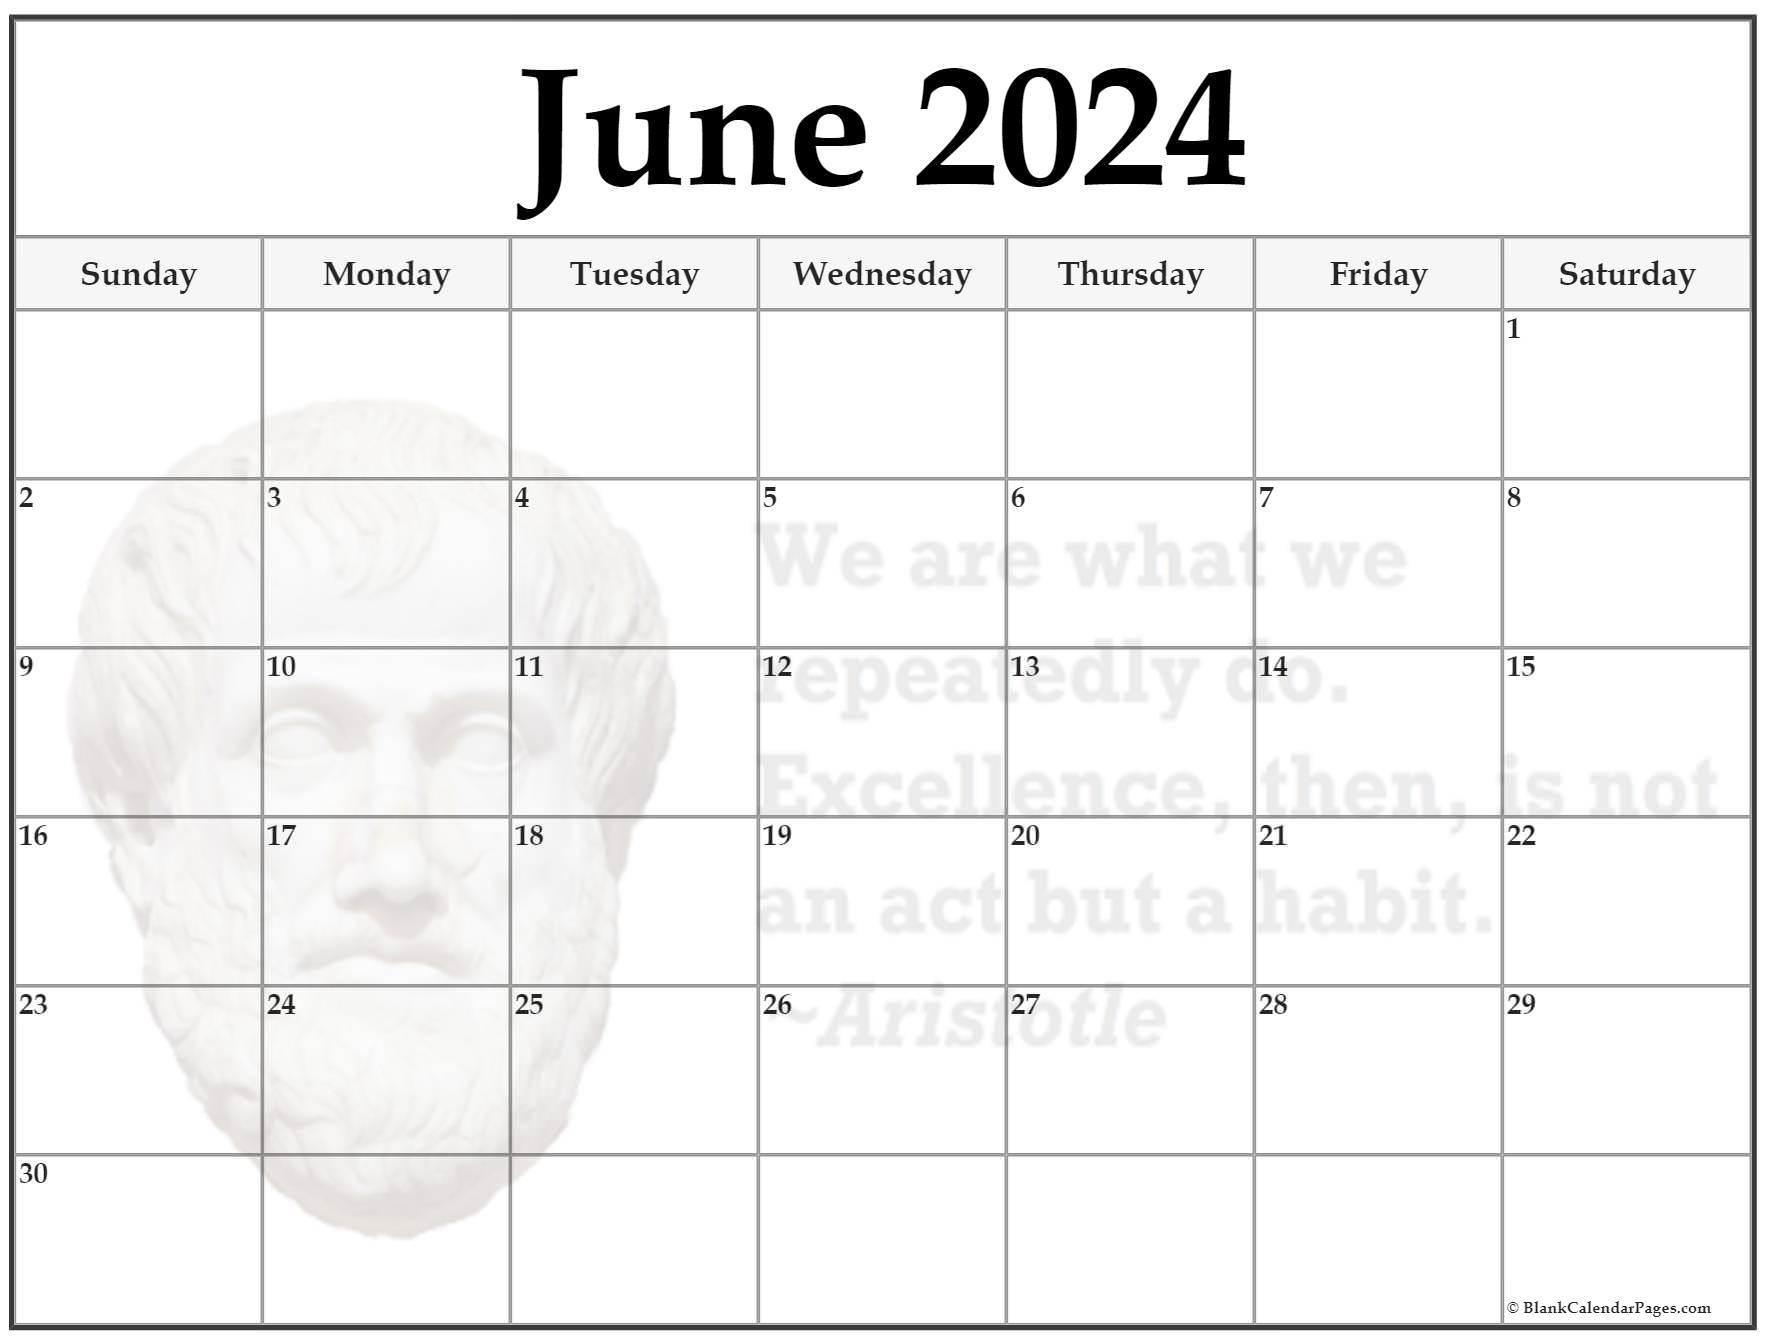 june-2023-calendar-image-get-latest-map-update-templates-for-word-excel